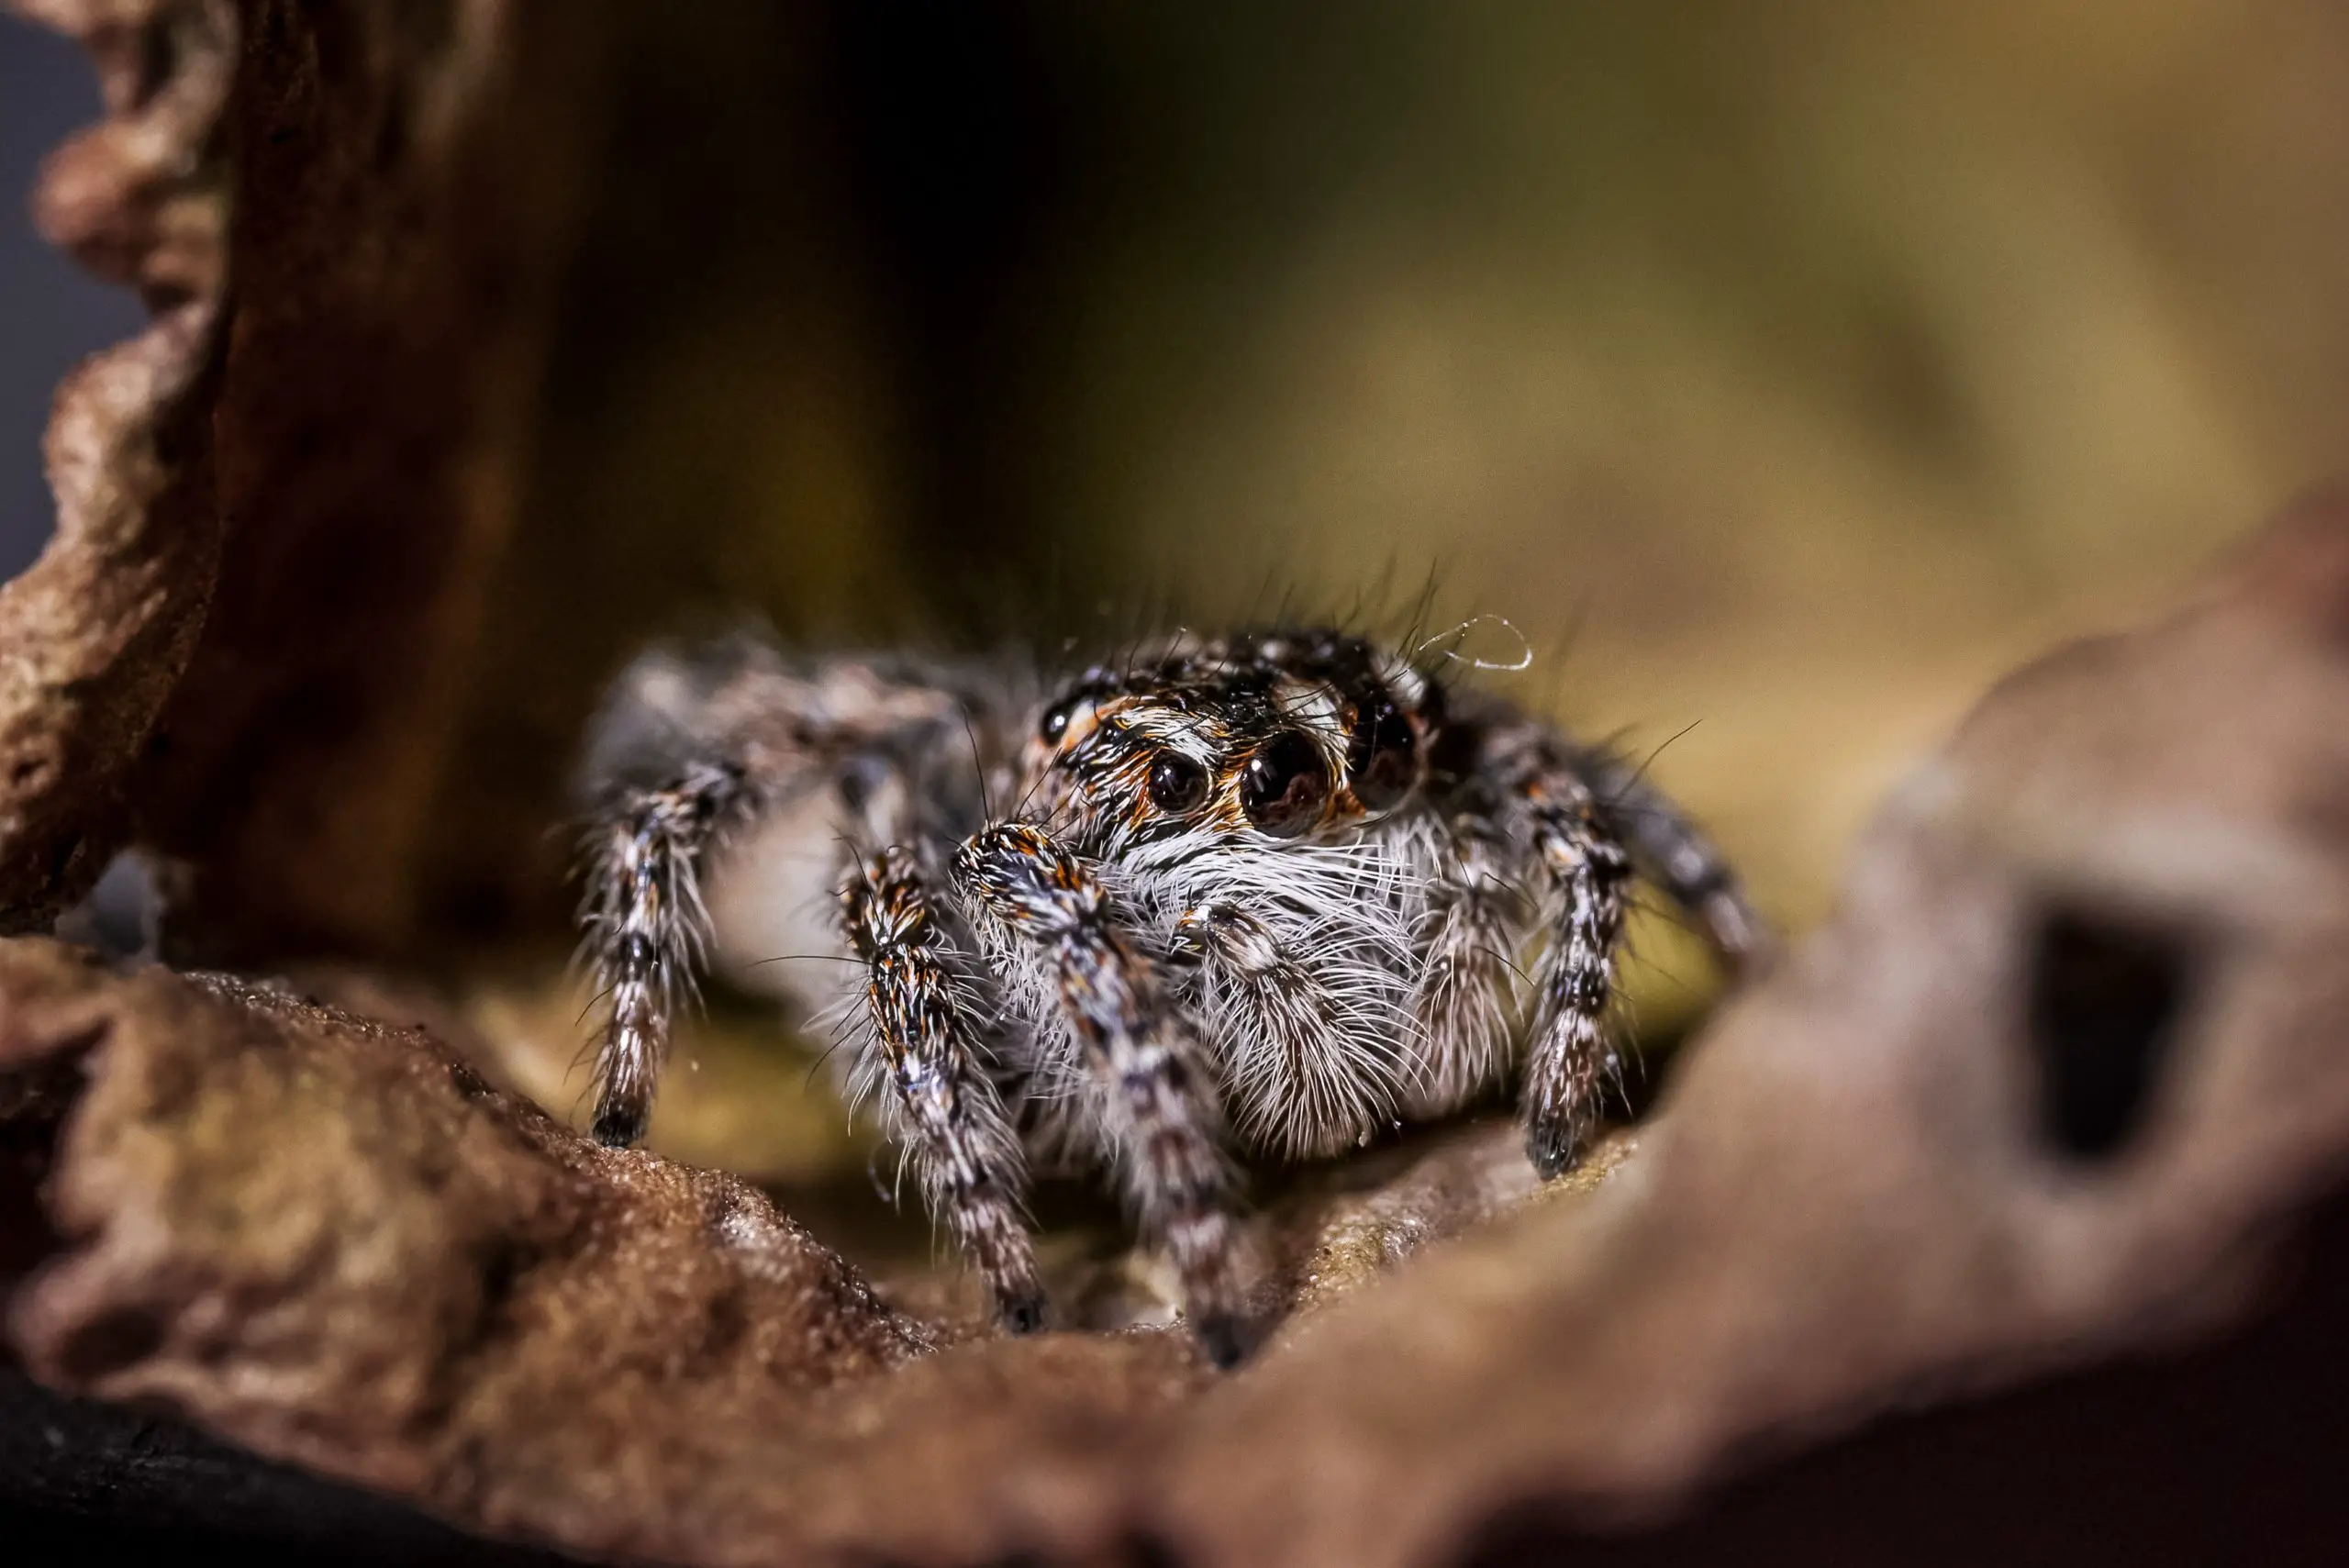 Jumping spider sat on a piece of bark